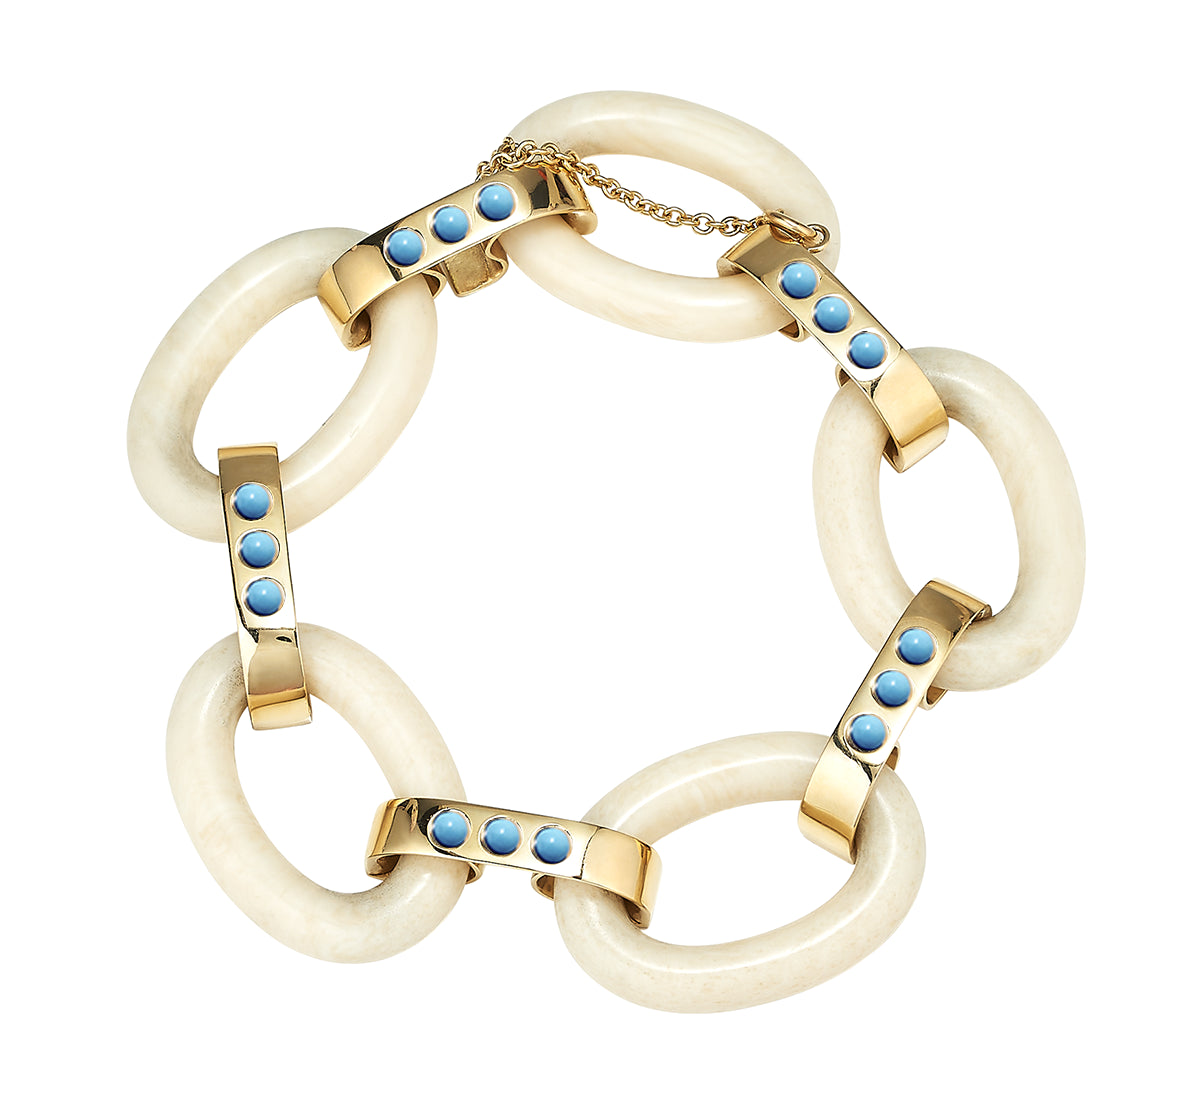 Ivory Link Bracelet with Turquoise